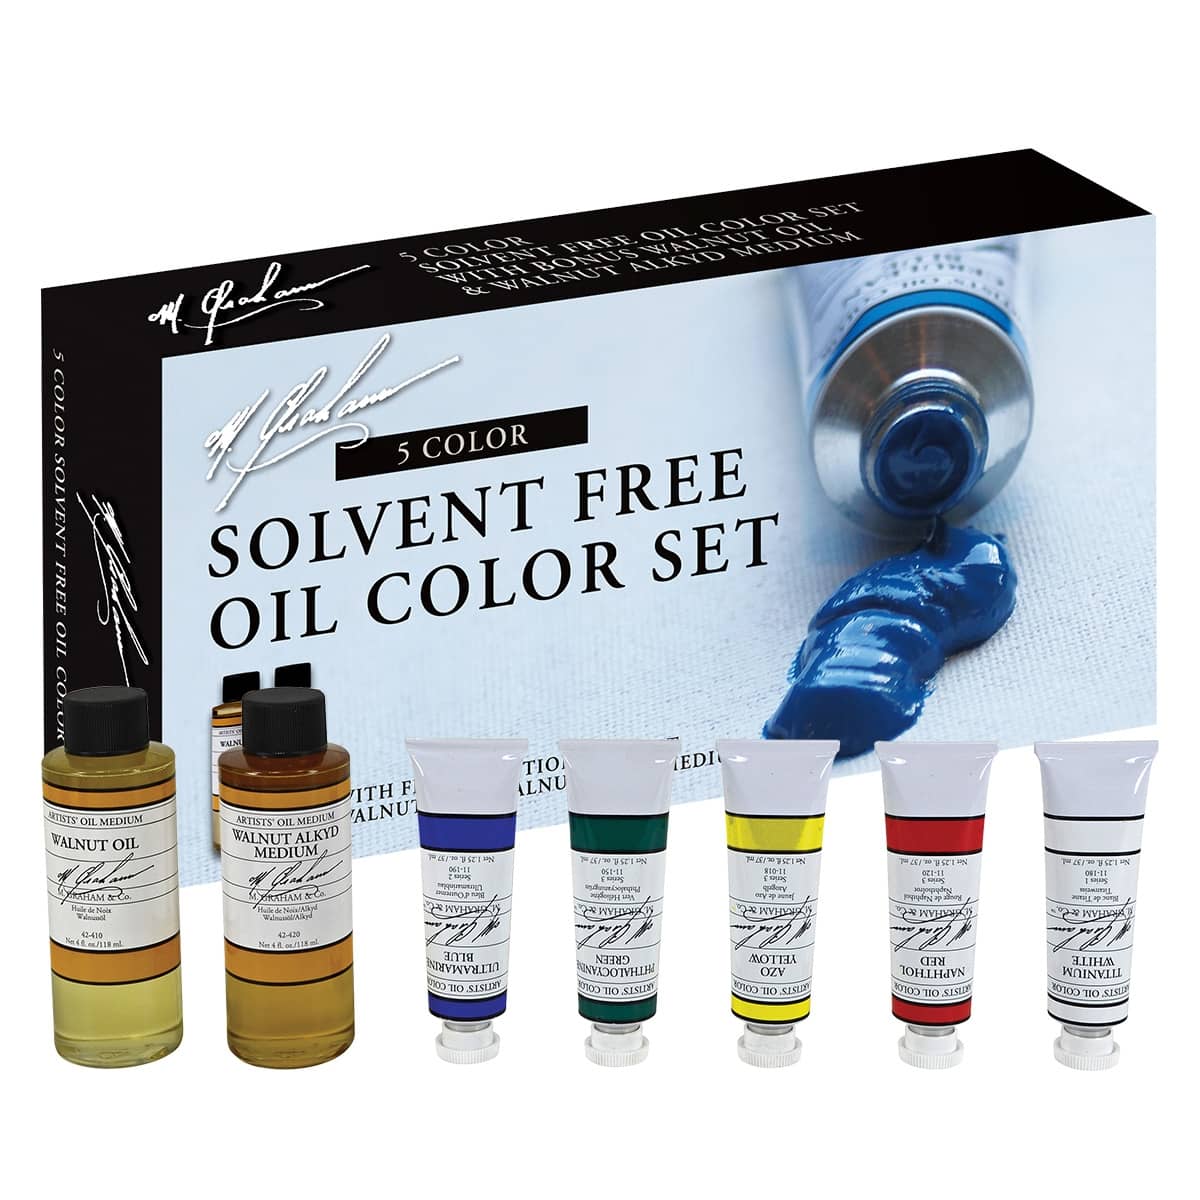 Jerry's Artarama Gamblin Artist Oil Color Paint - Professional Curated Collection of 24 Assorted Colors - 37ml Tubes